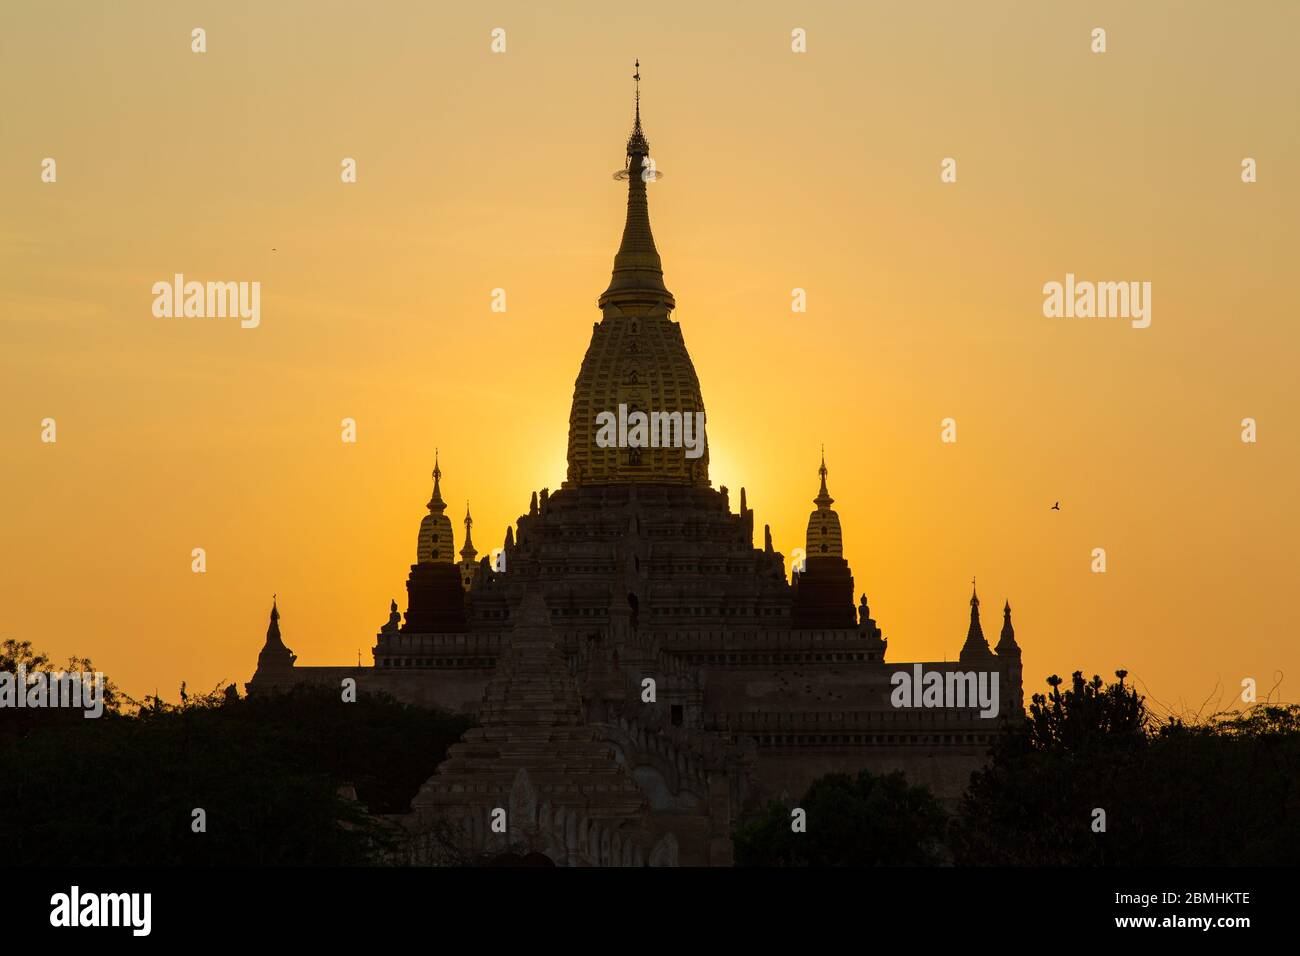 Ananda temple as a silhouette during sunset, Bagan, Myanmar Stock Photo